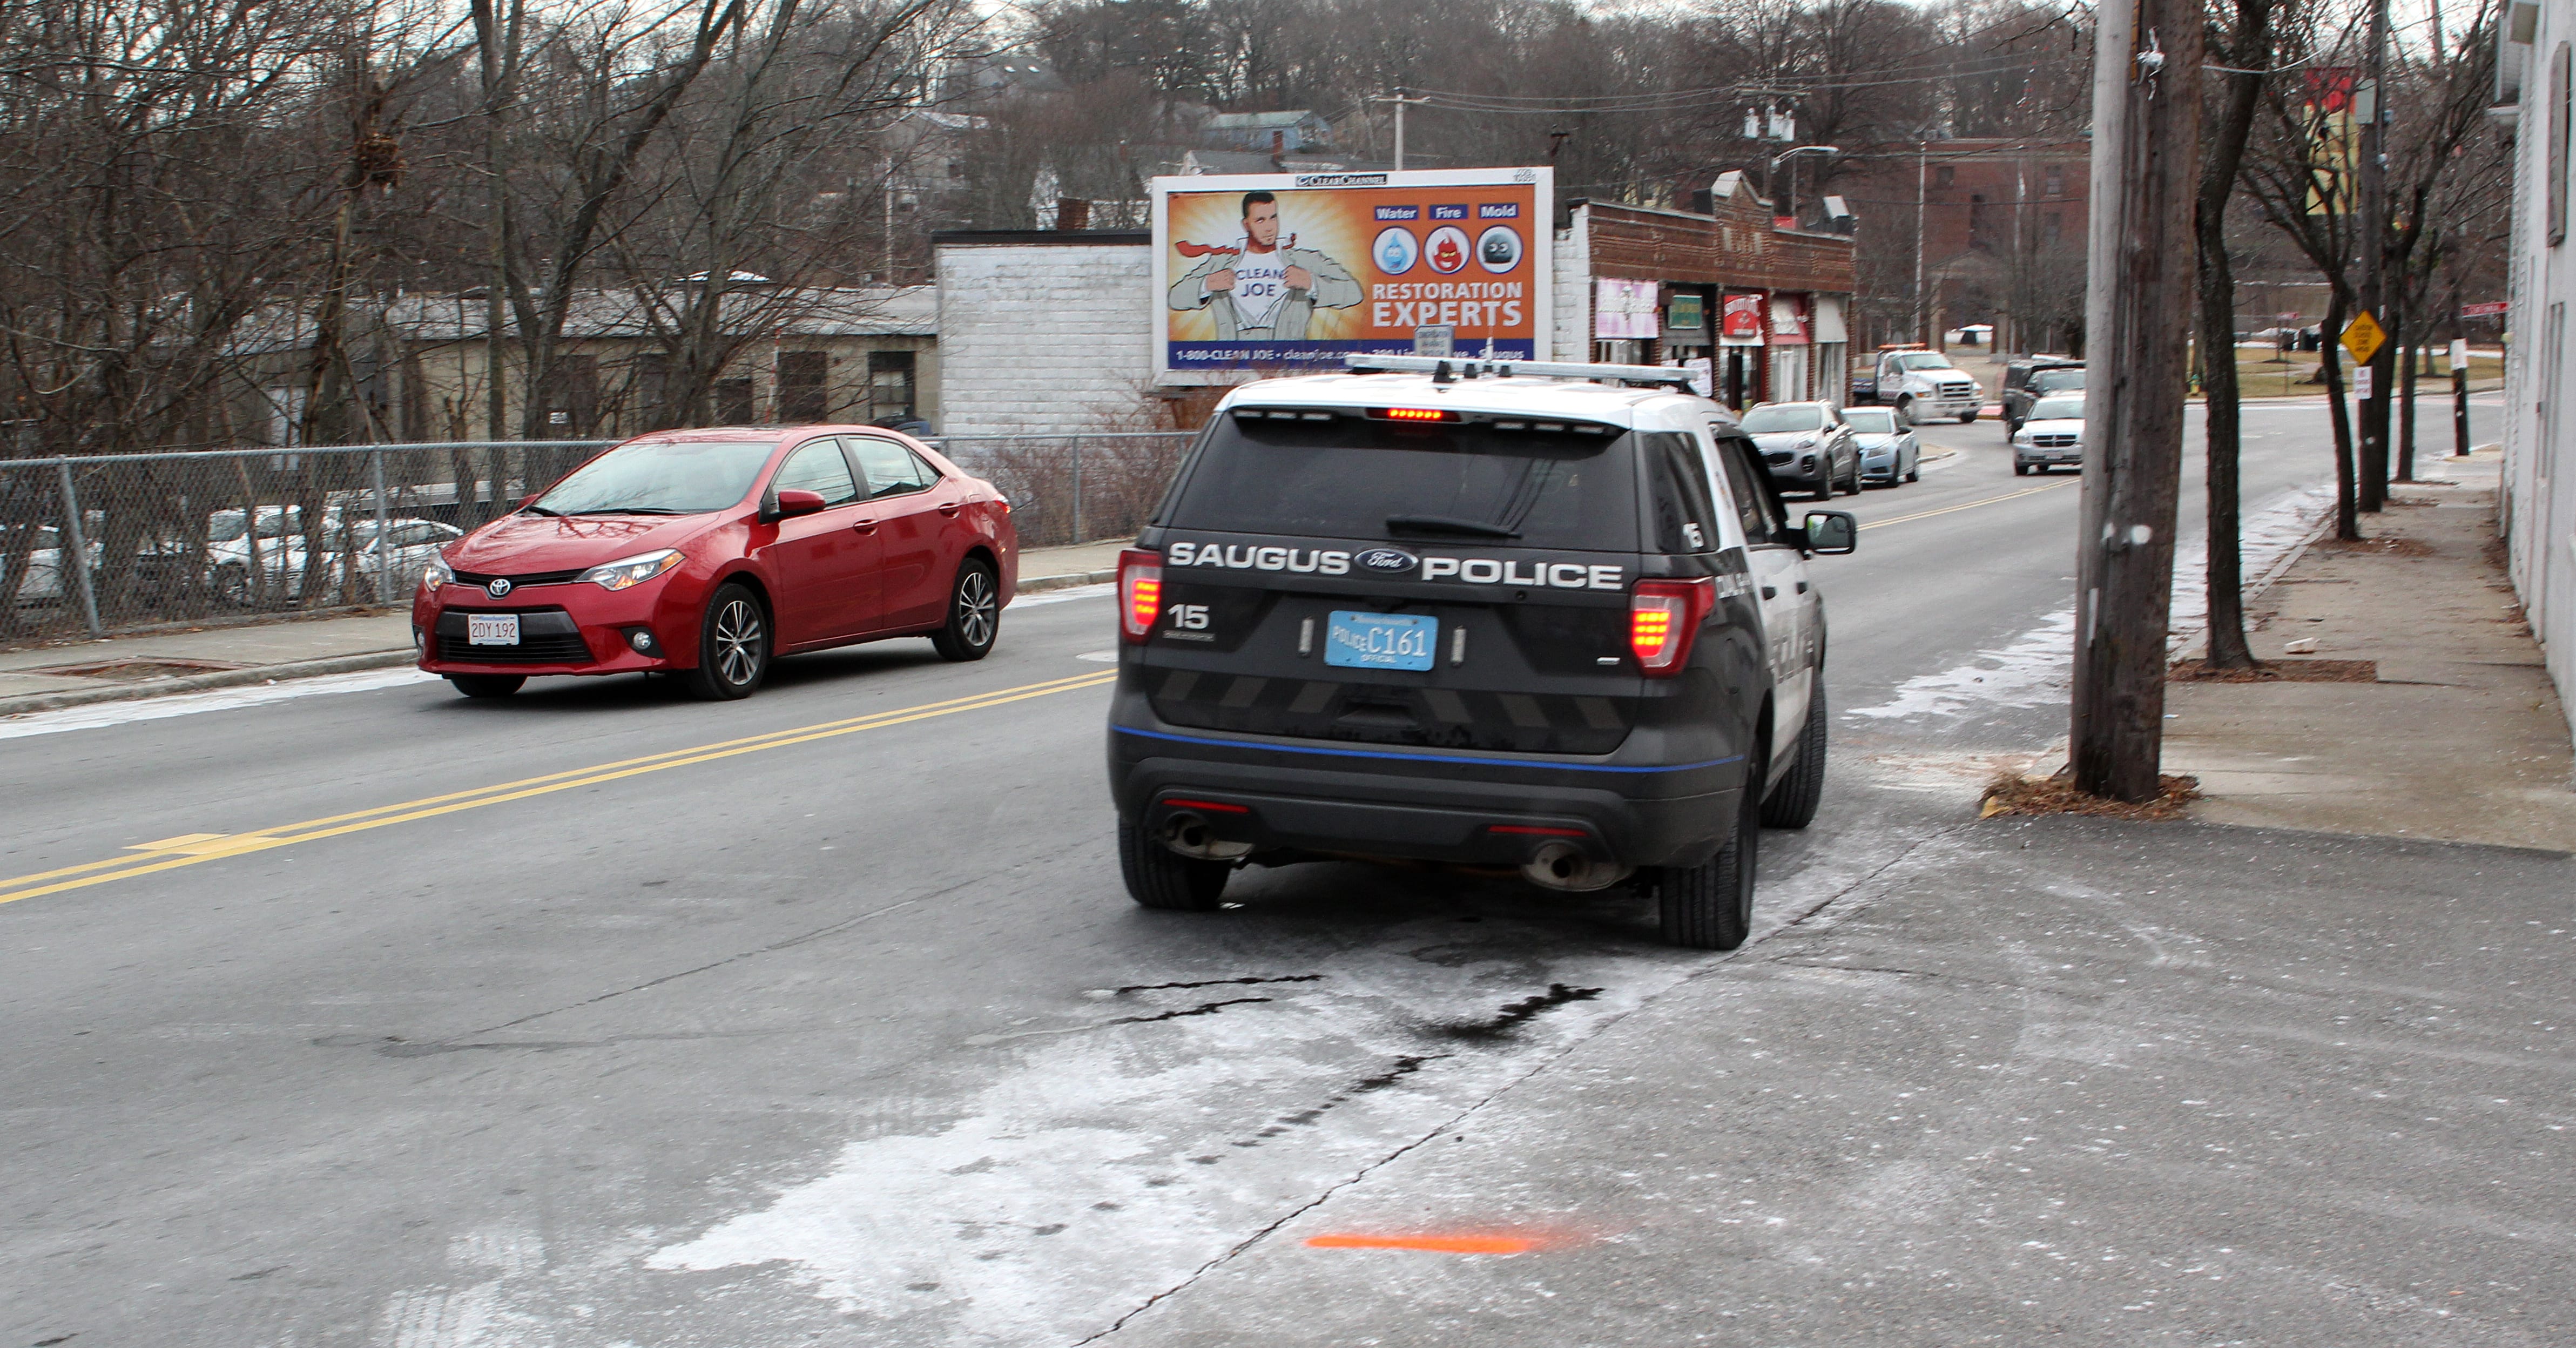 Saugus, Ma. 1-16-18. A Saugus police car leaves the scene of a pedestrian accident today.